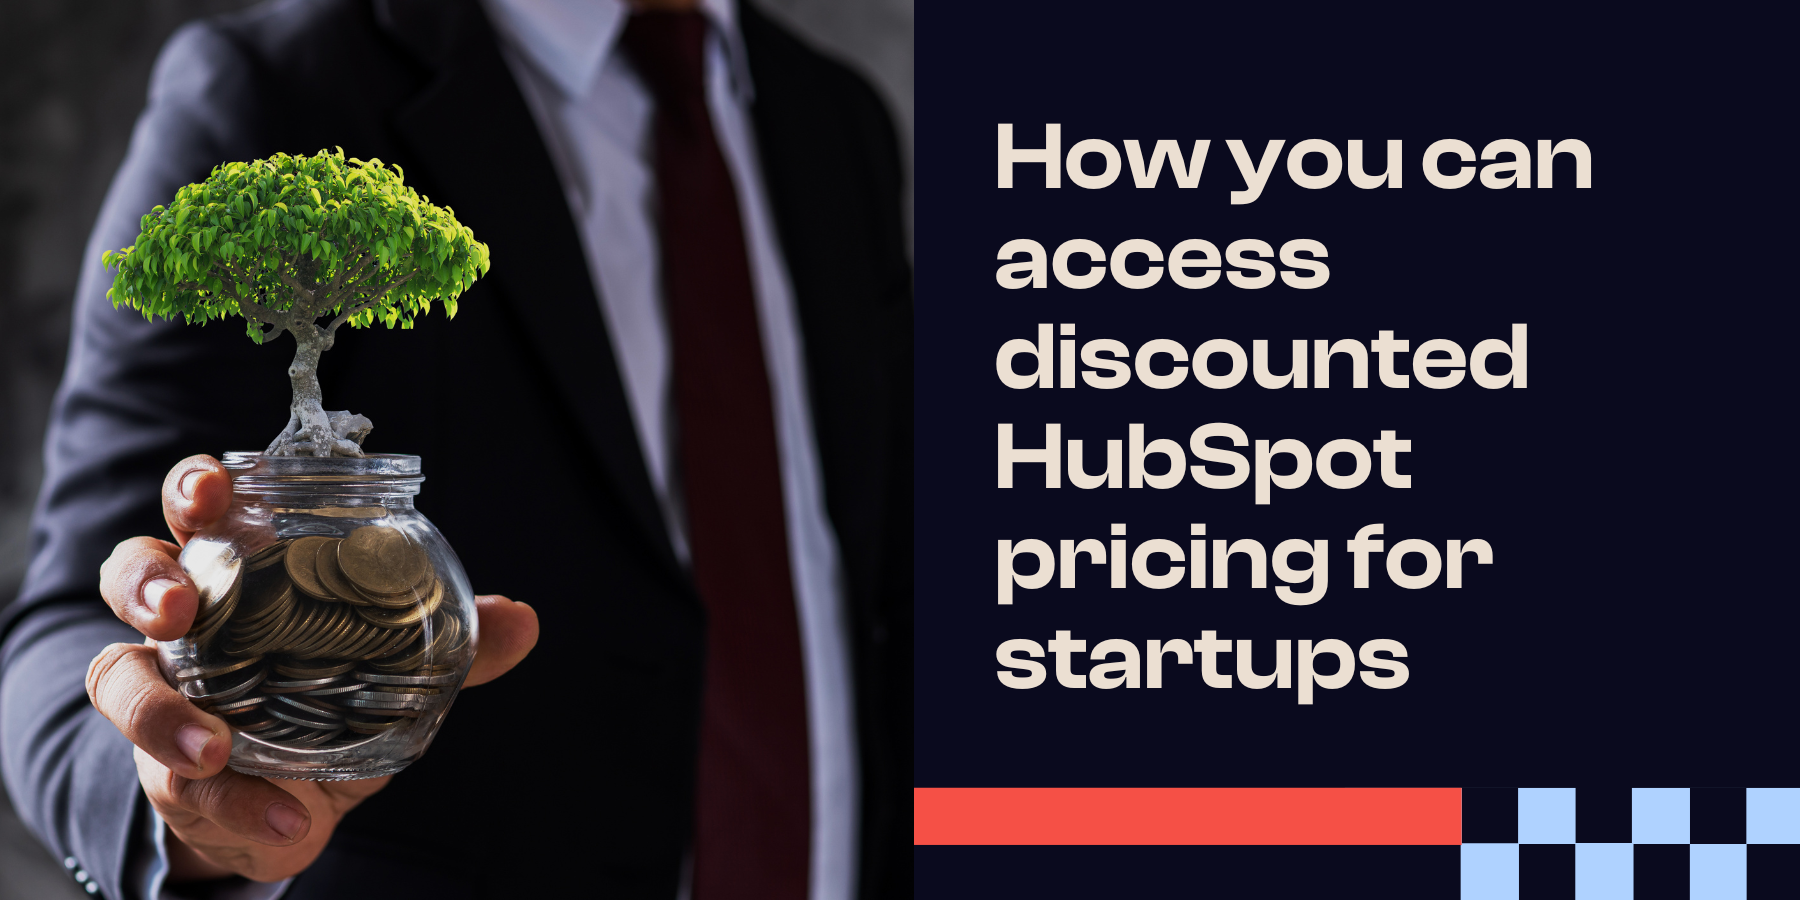 How you can access discounted HubSpot pricing for startups